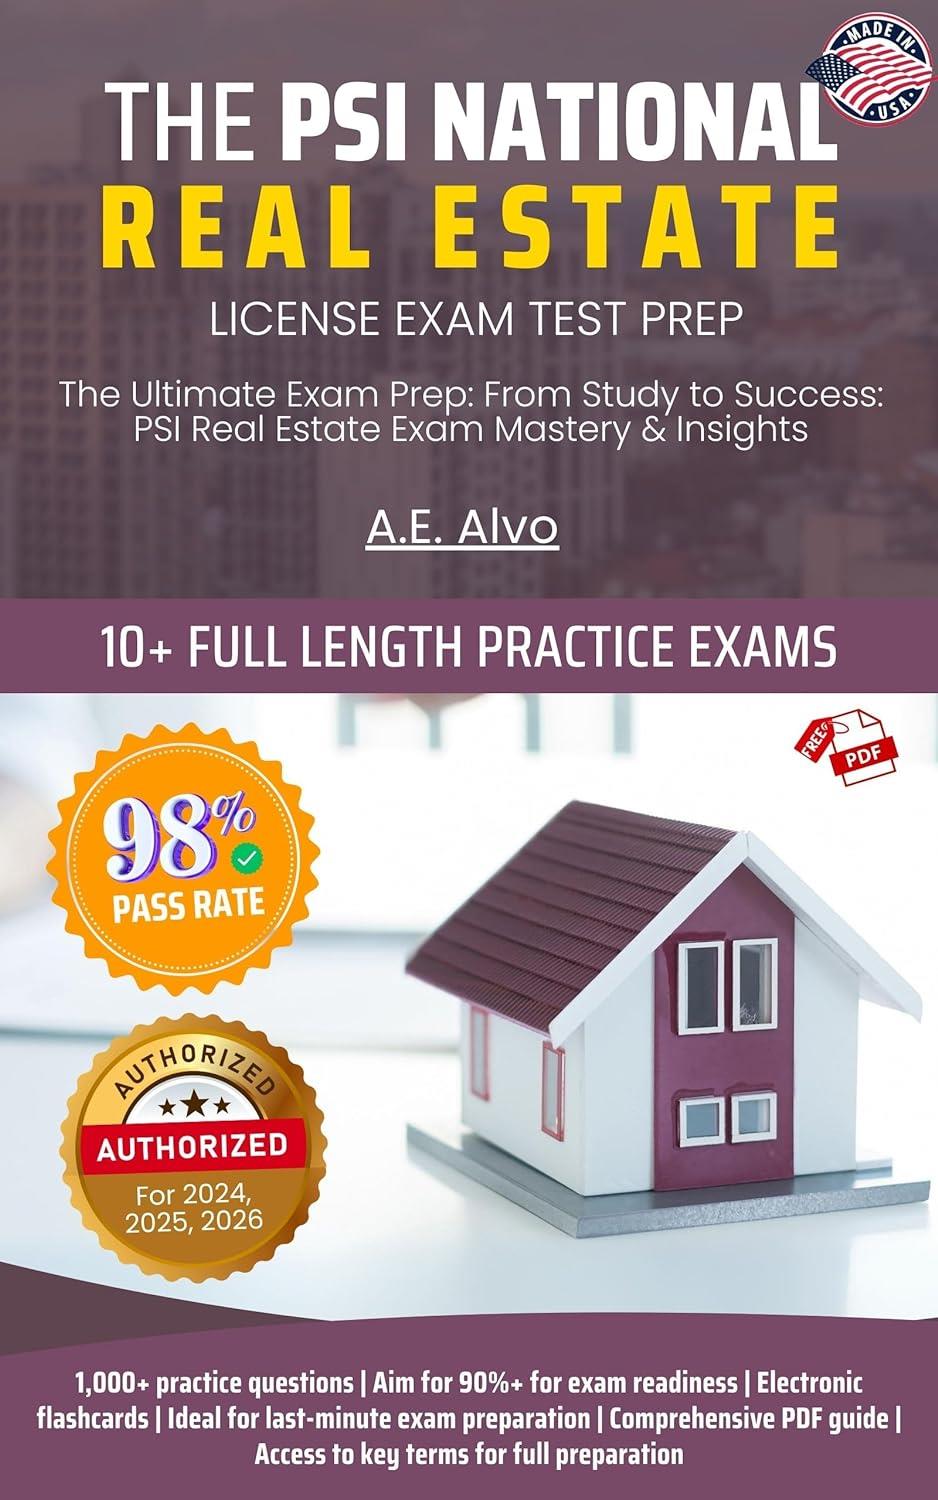 The PSI National Real Estate License Exam Test Prep – The Ultimate Exam Prep: From Study to Success